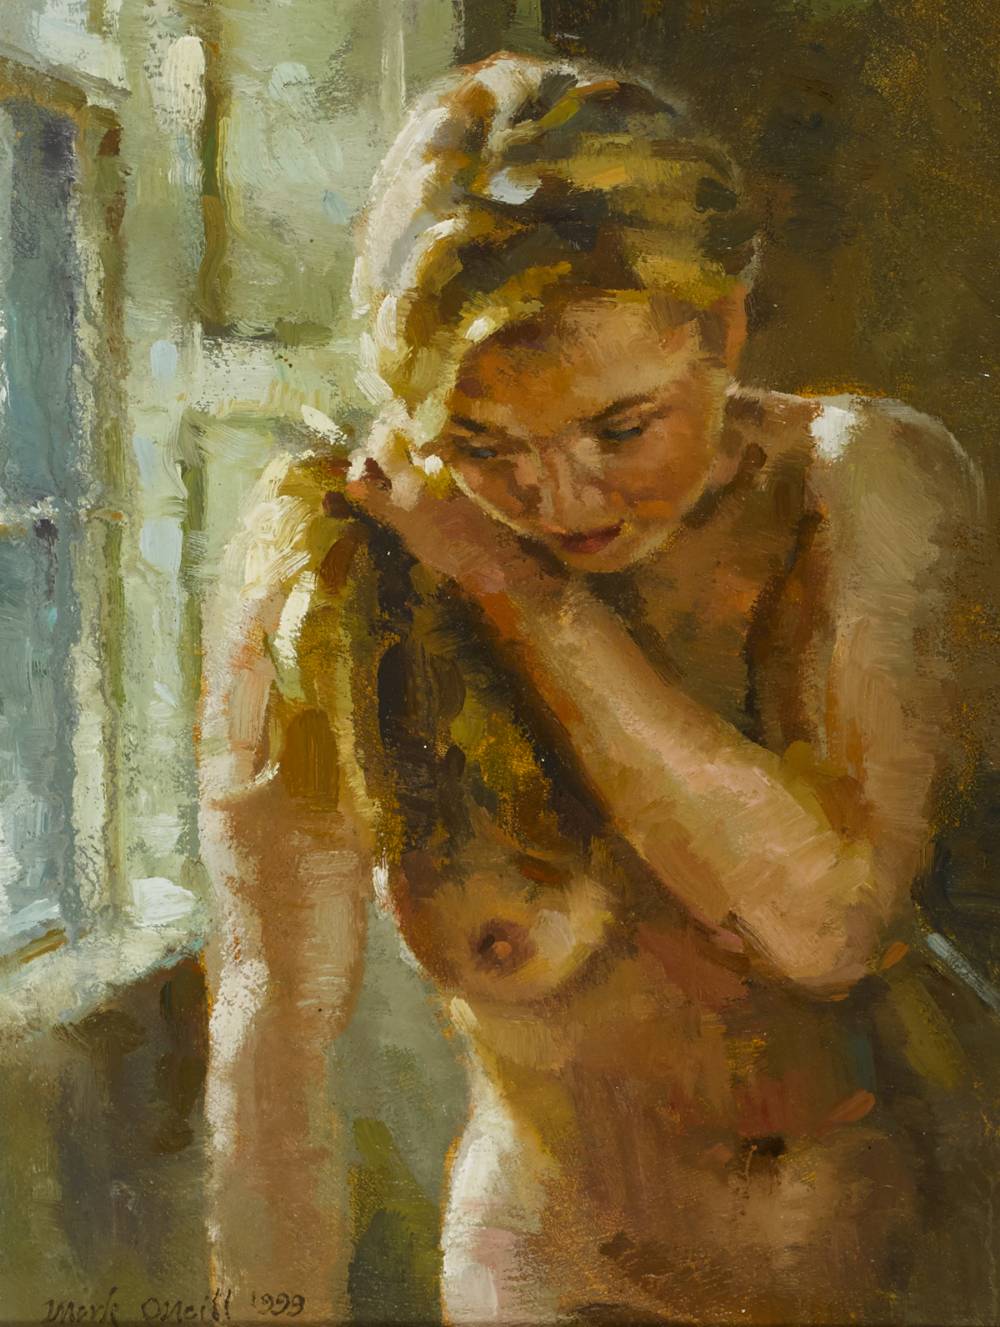 NUDE, 1999 by Mark O'Neill (b.1963) (b.1963) at Whyte's Auctions